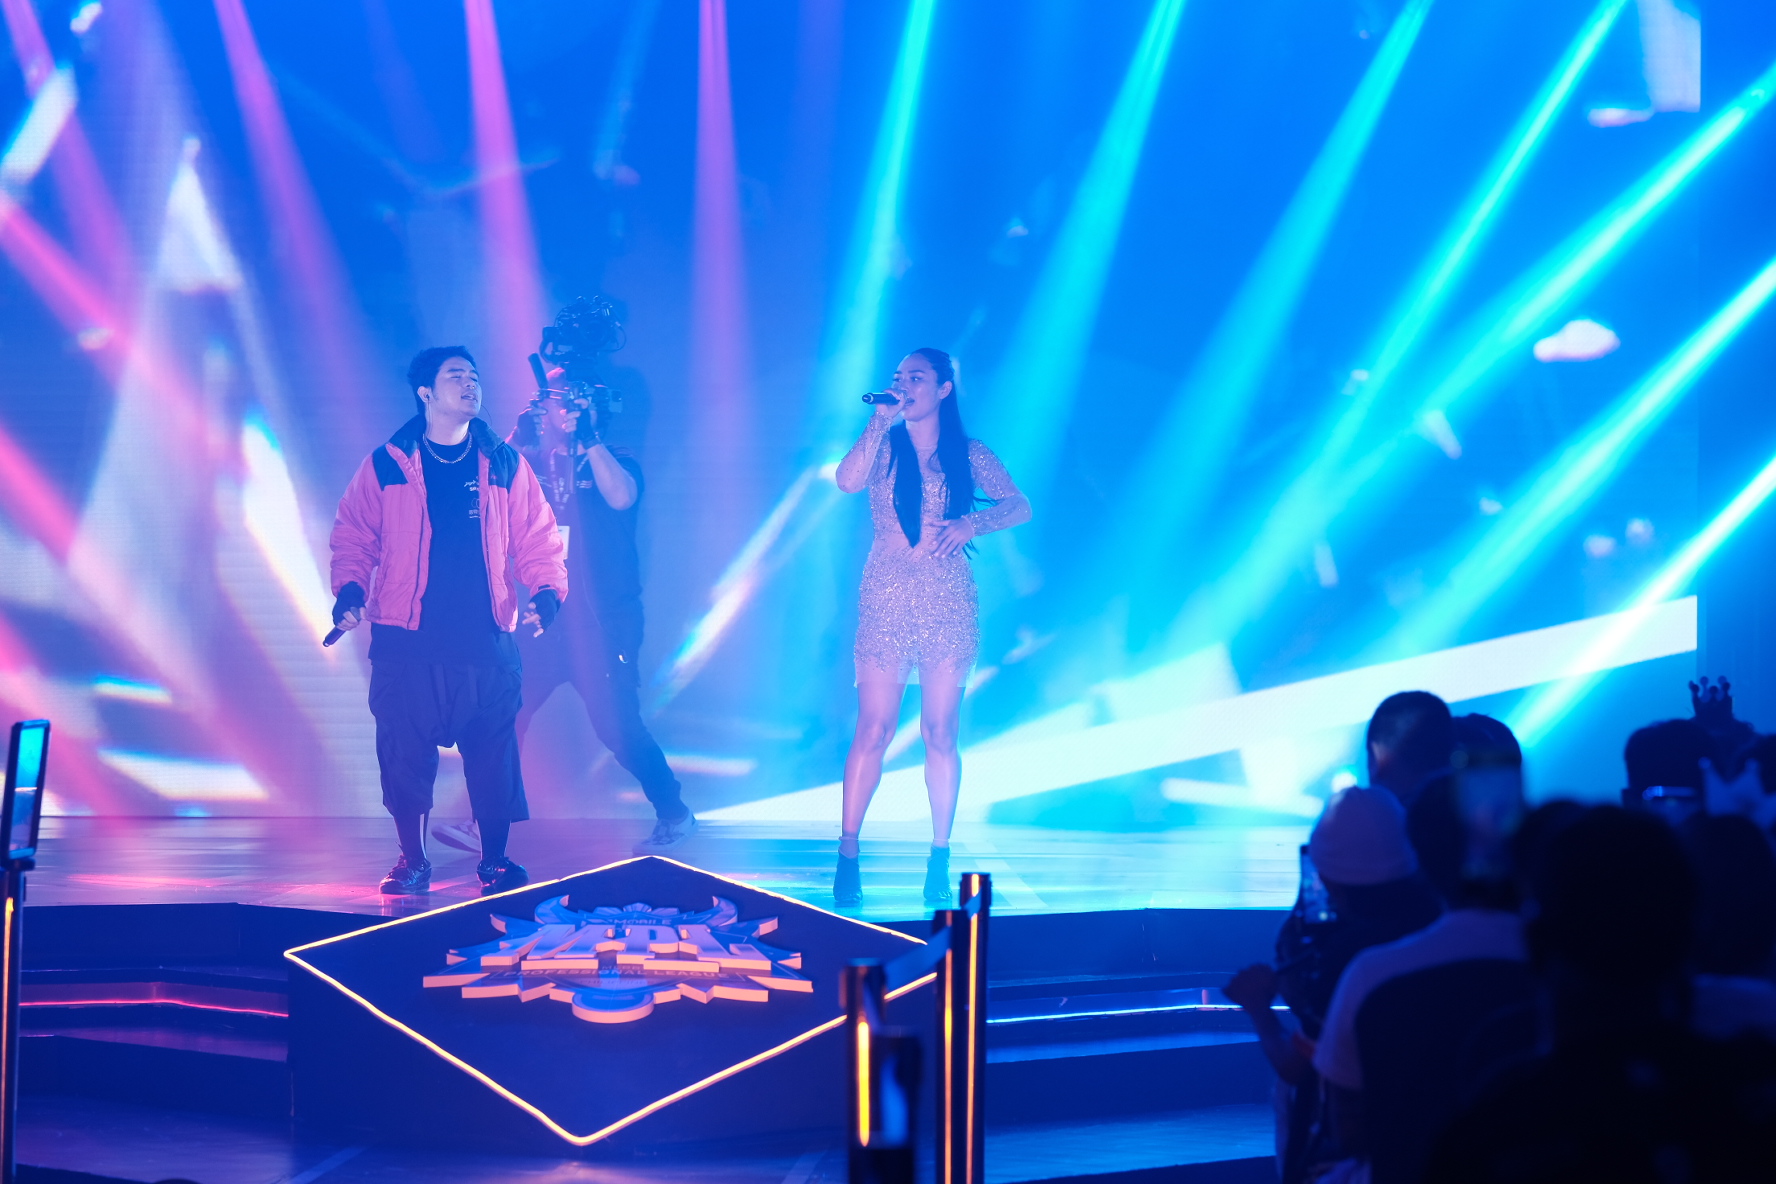 Alisson Shore and Jessica Sanchez light up the stage in the MPL S11 grand finals.